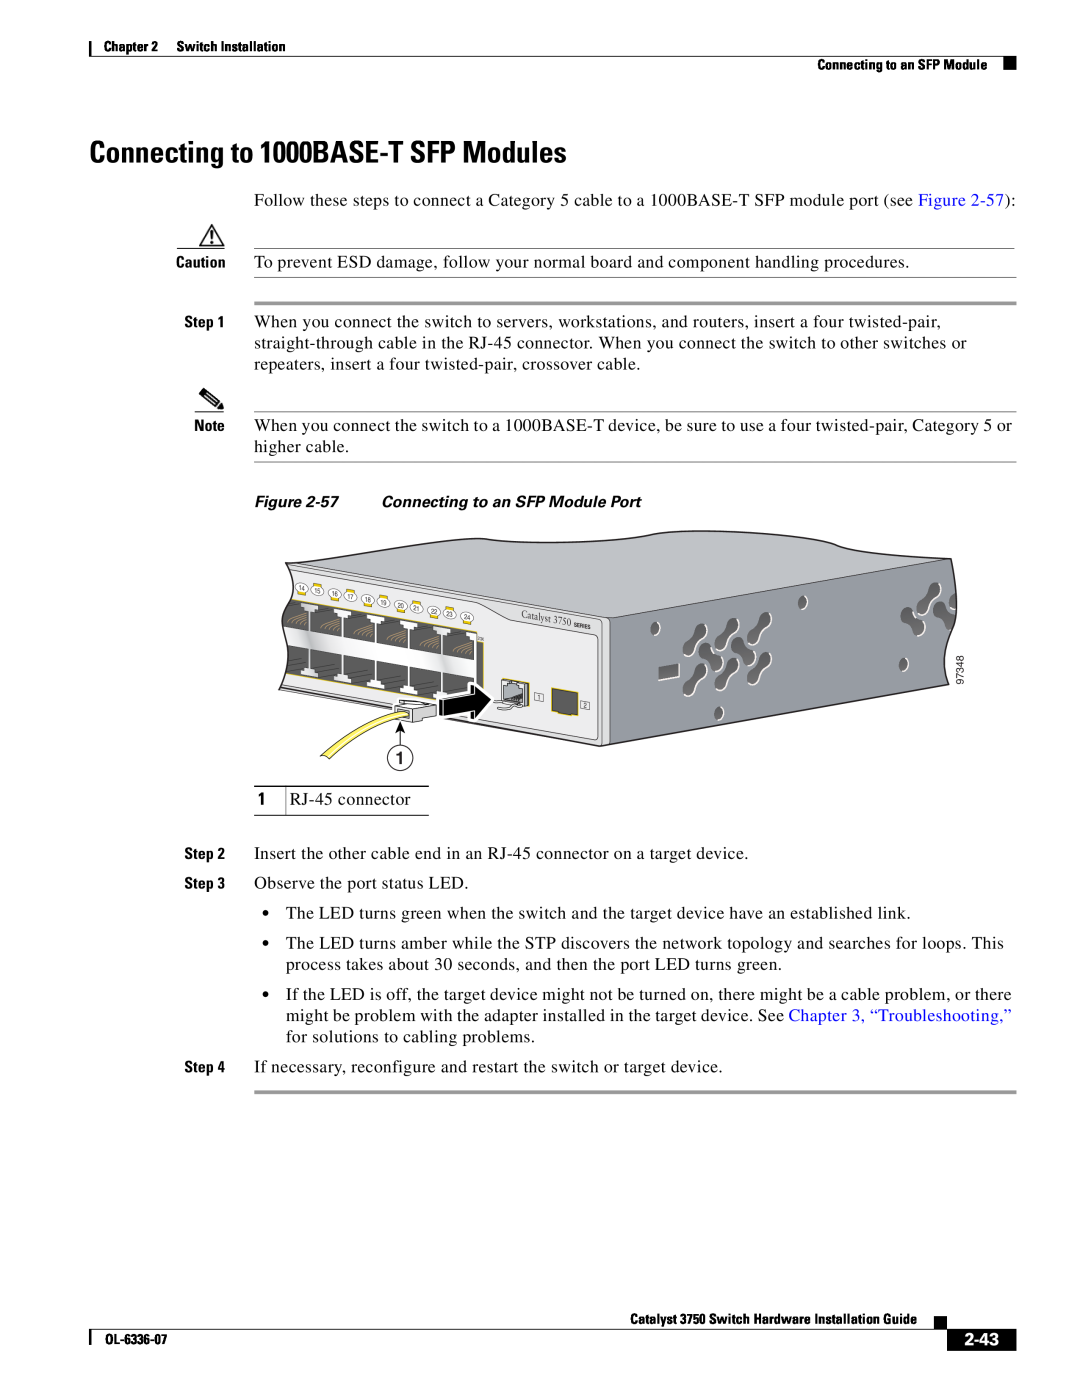 Cisco Systems WSC3750X24TS specifications Connecting to 1000BASE-T SFP Modules, 2-43, 57 Connecting to an SFP Module Port 